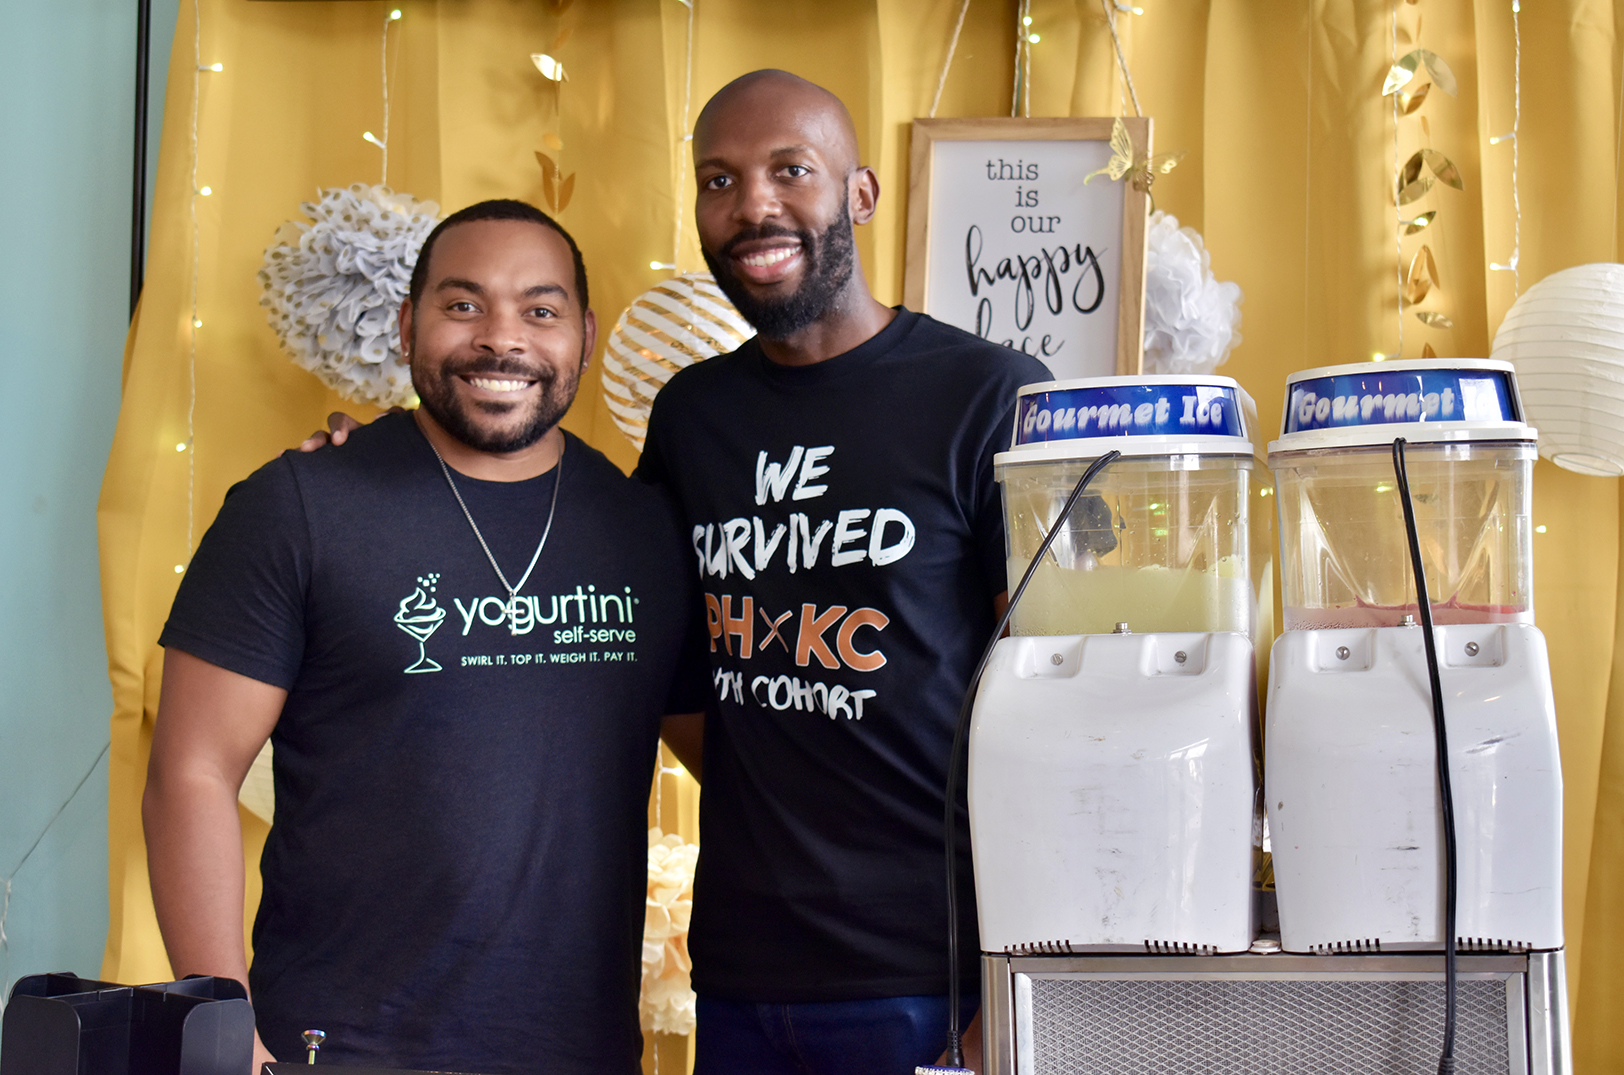 Froyo with a ’tini twist: Entrepreneur collaboration serves alcoholic frozen yogurt in KC